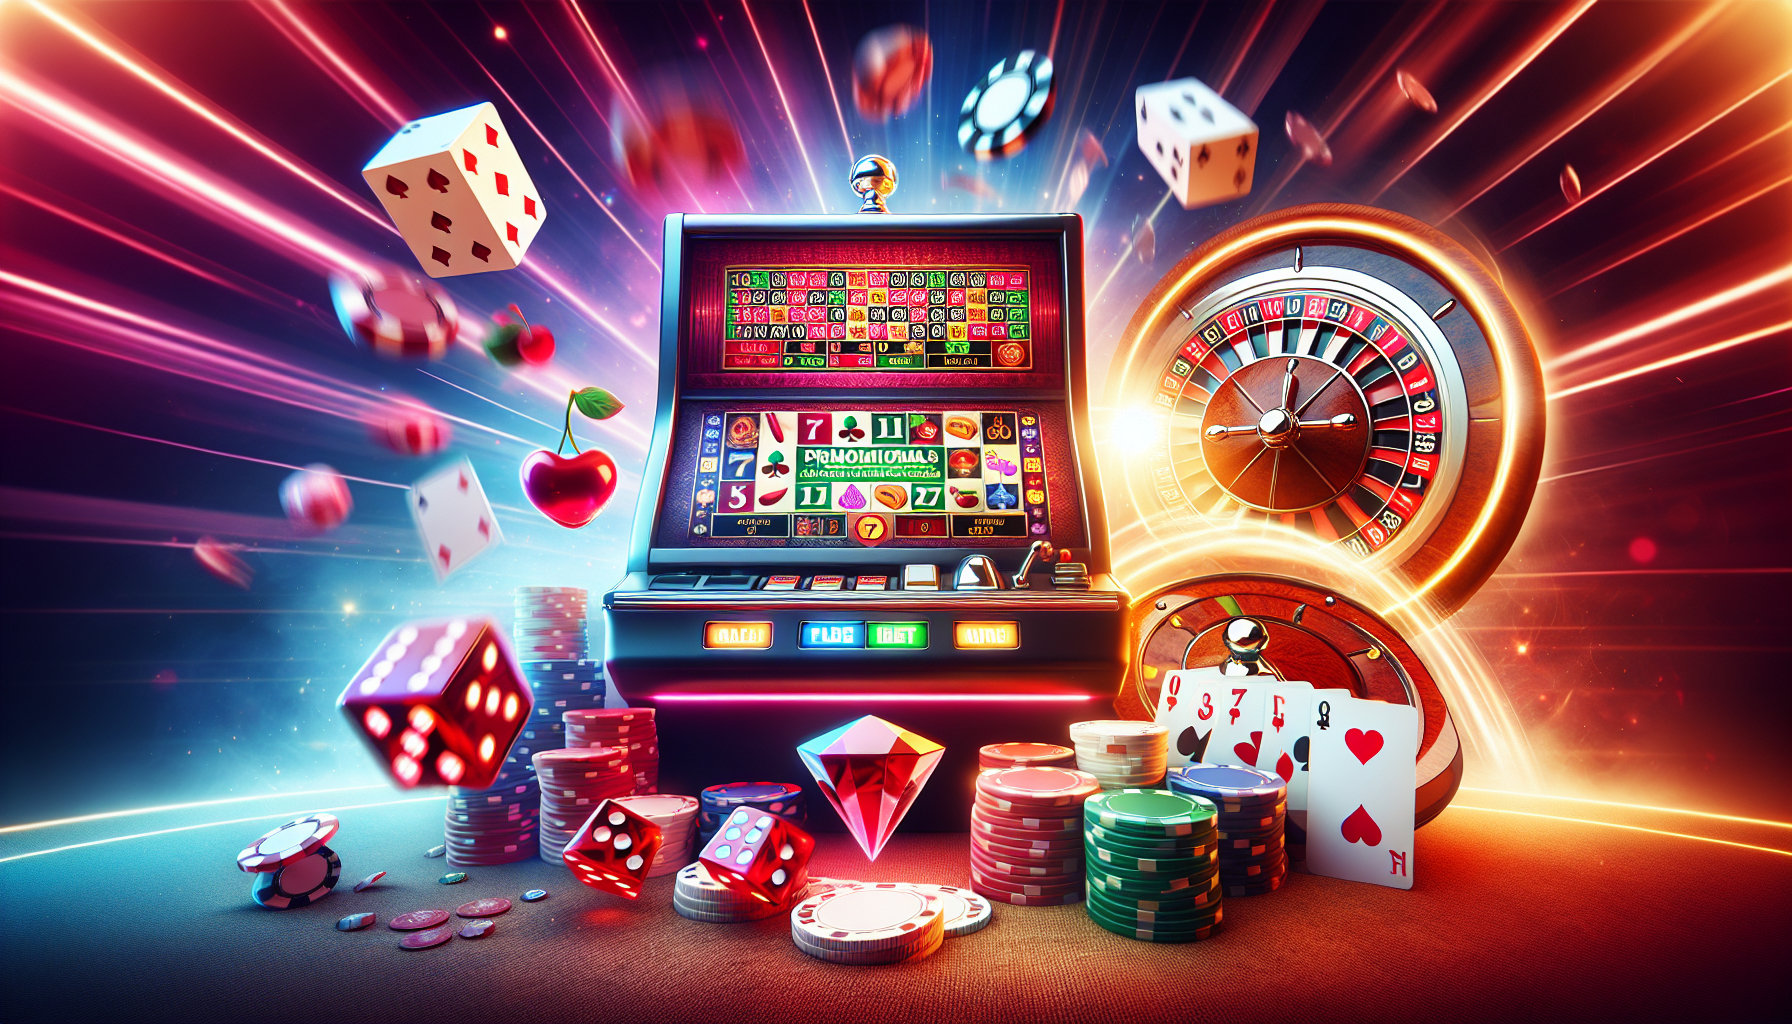 Exciting online casino community bonuses and promotions